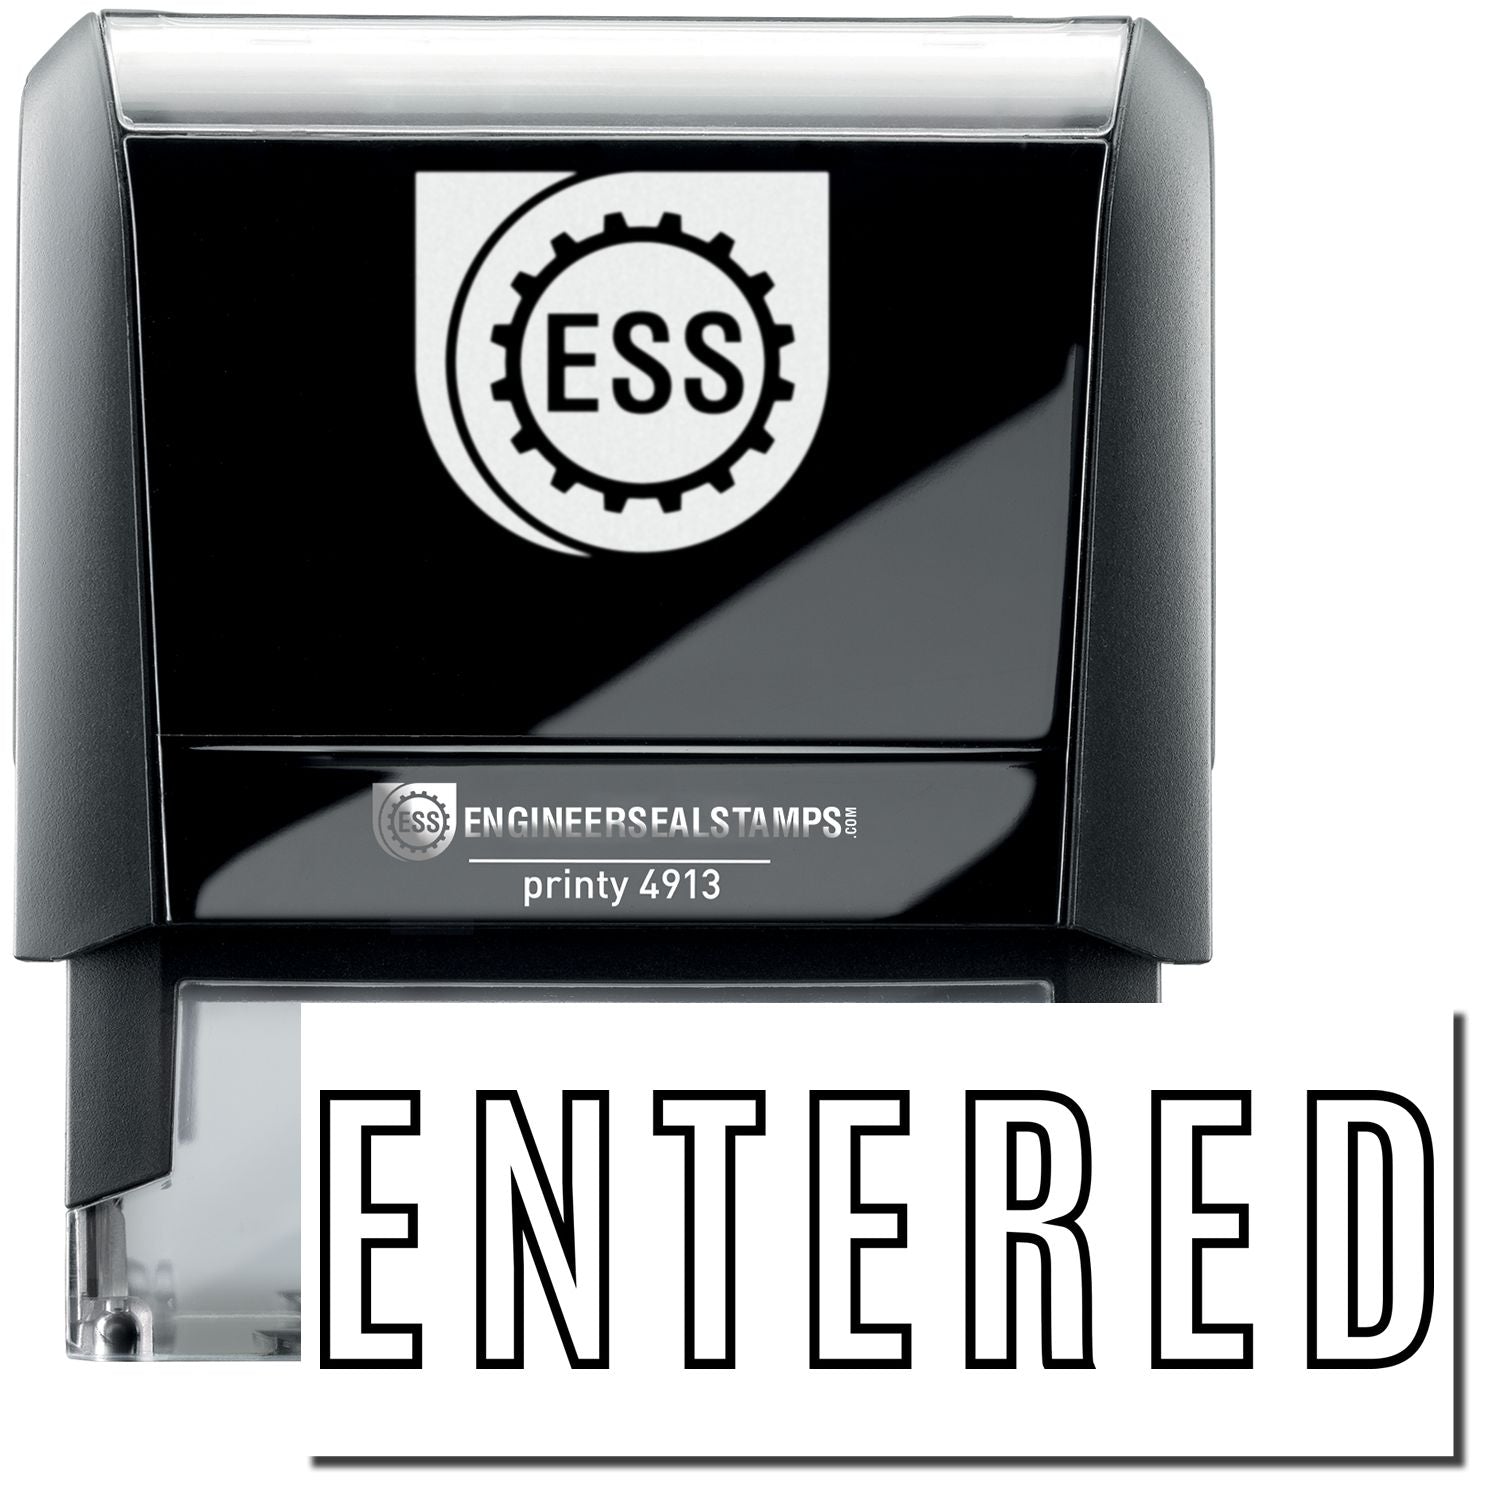 A self-inking stamp with a stamped image showing how the text "ENTERED" in a large outline font is displayed by it after stamping.